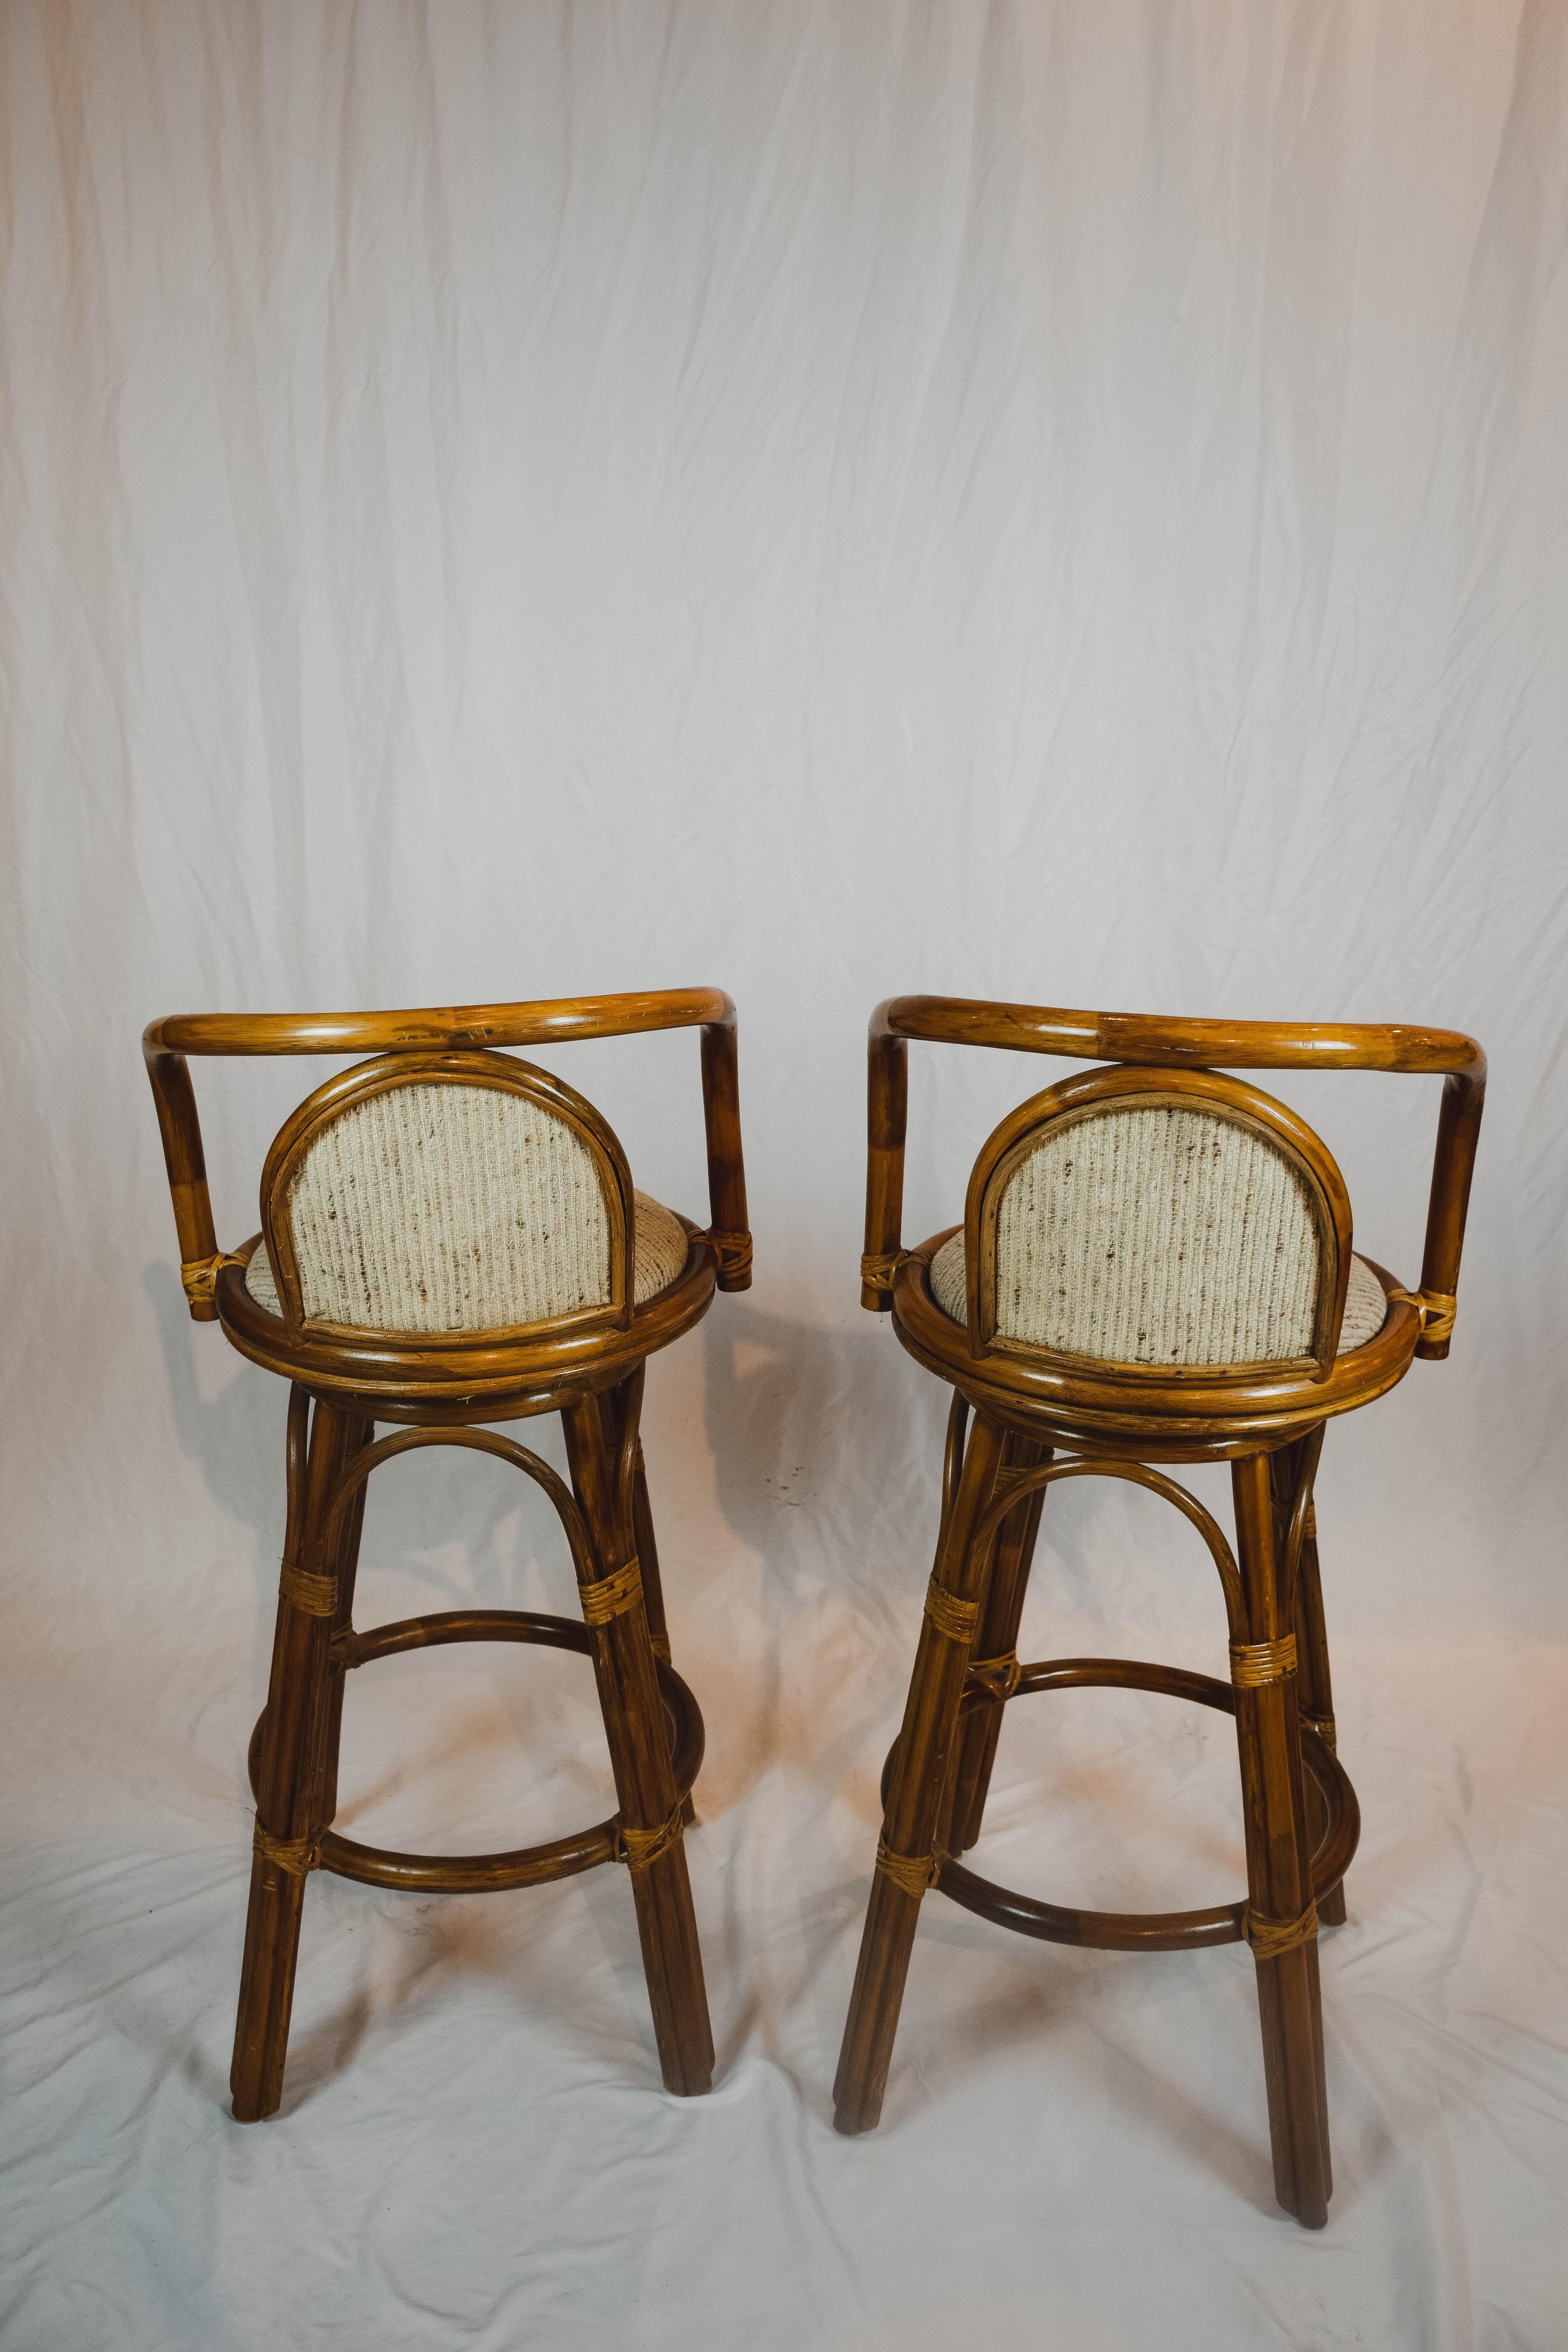 Pair of Tiki upholstered bamboo and rattan midcentury bar stools. These bentwood stools are bar height, with swivel seats and foot rests. They are upholstered in a neutral cream/beige fabric.